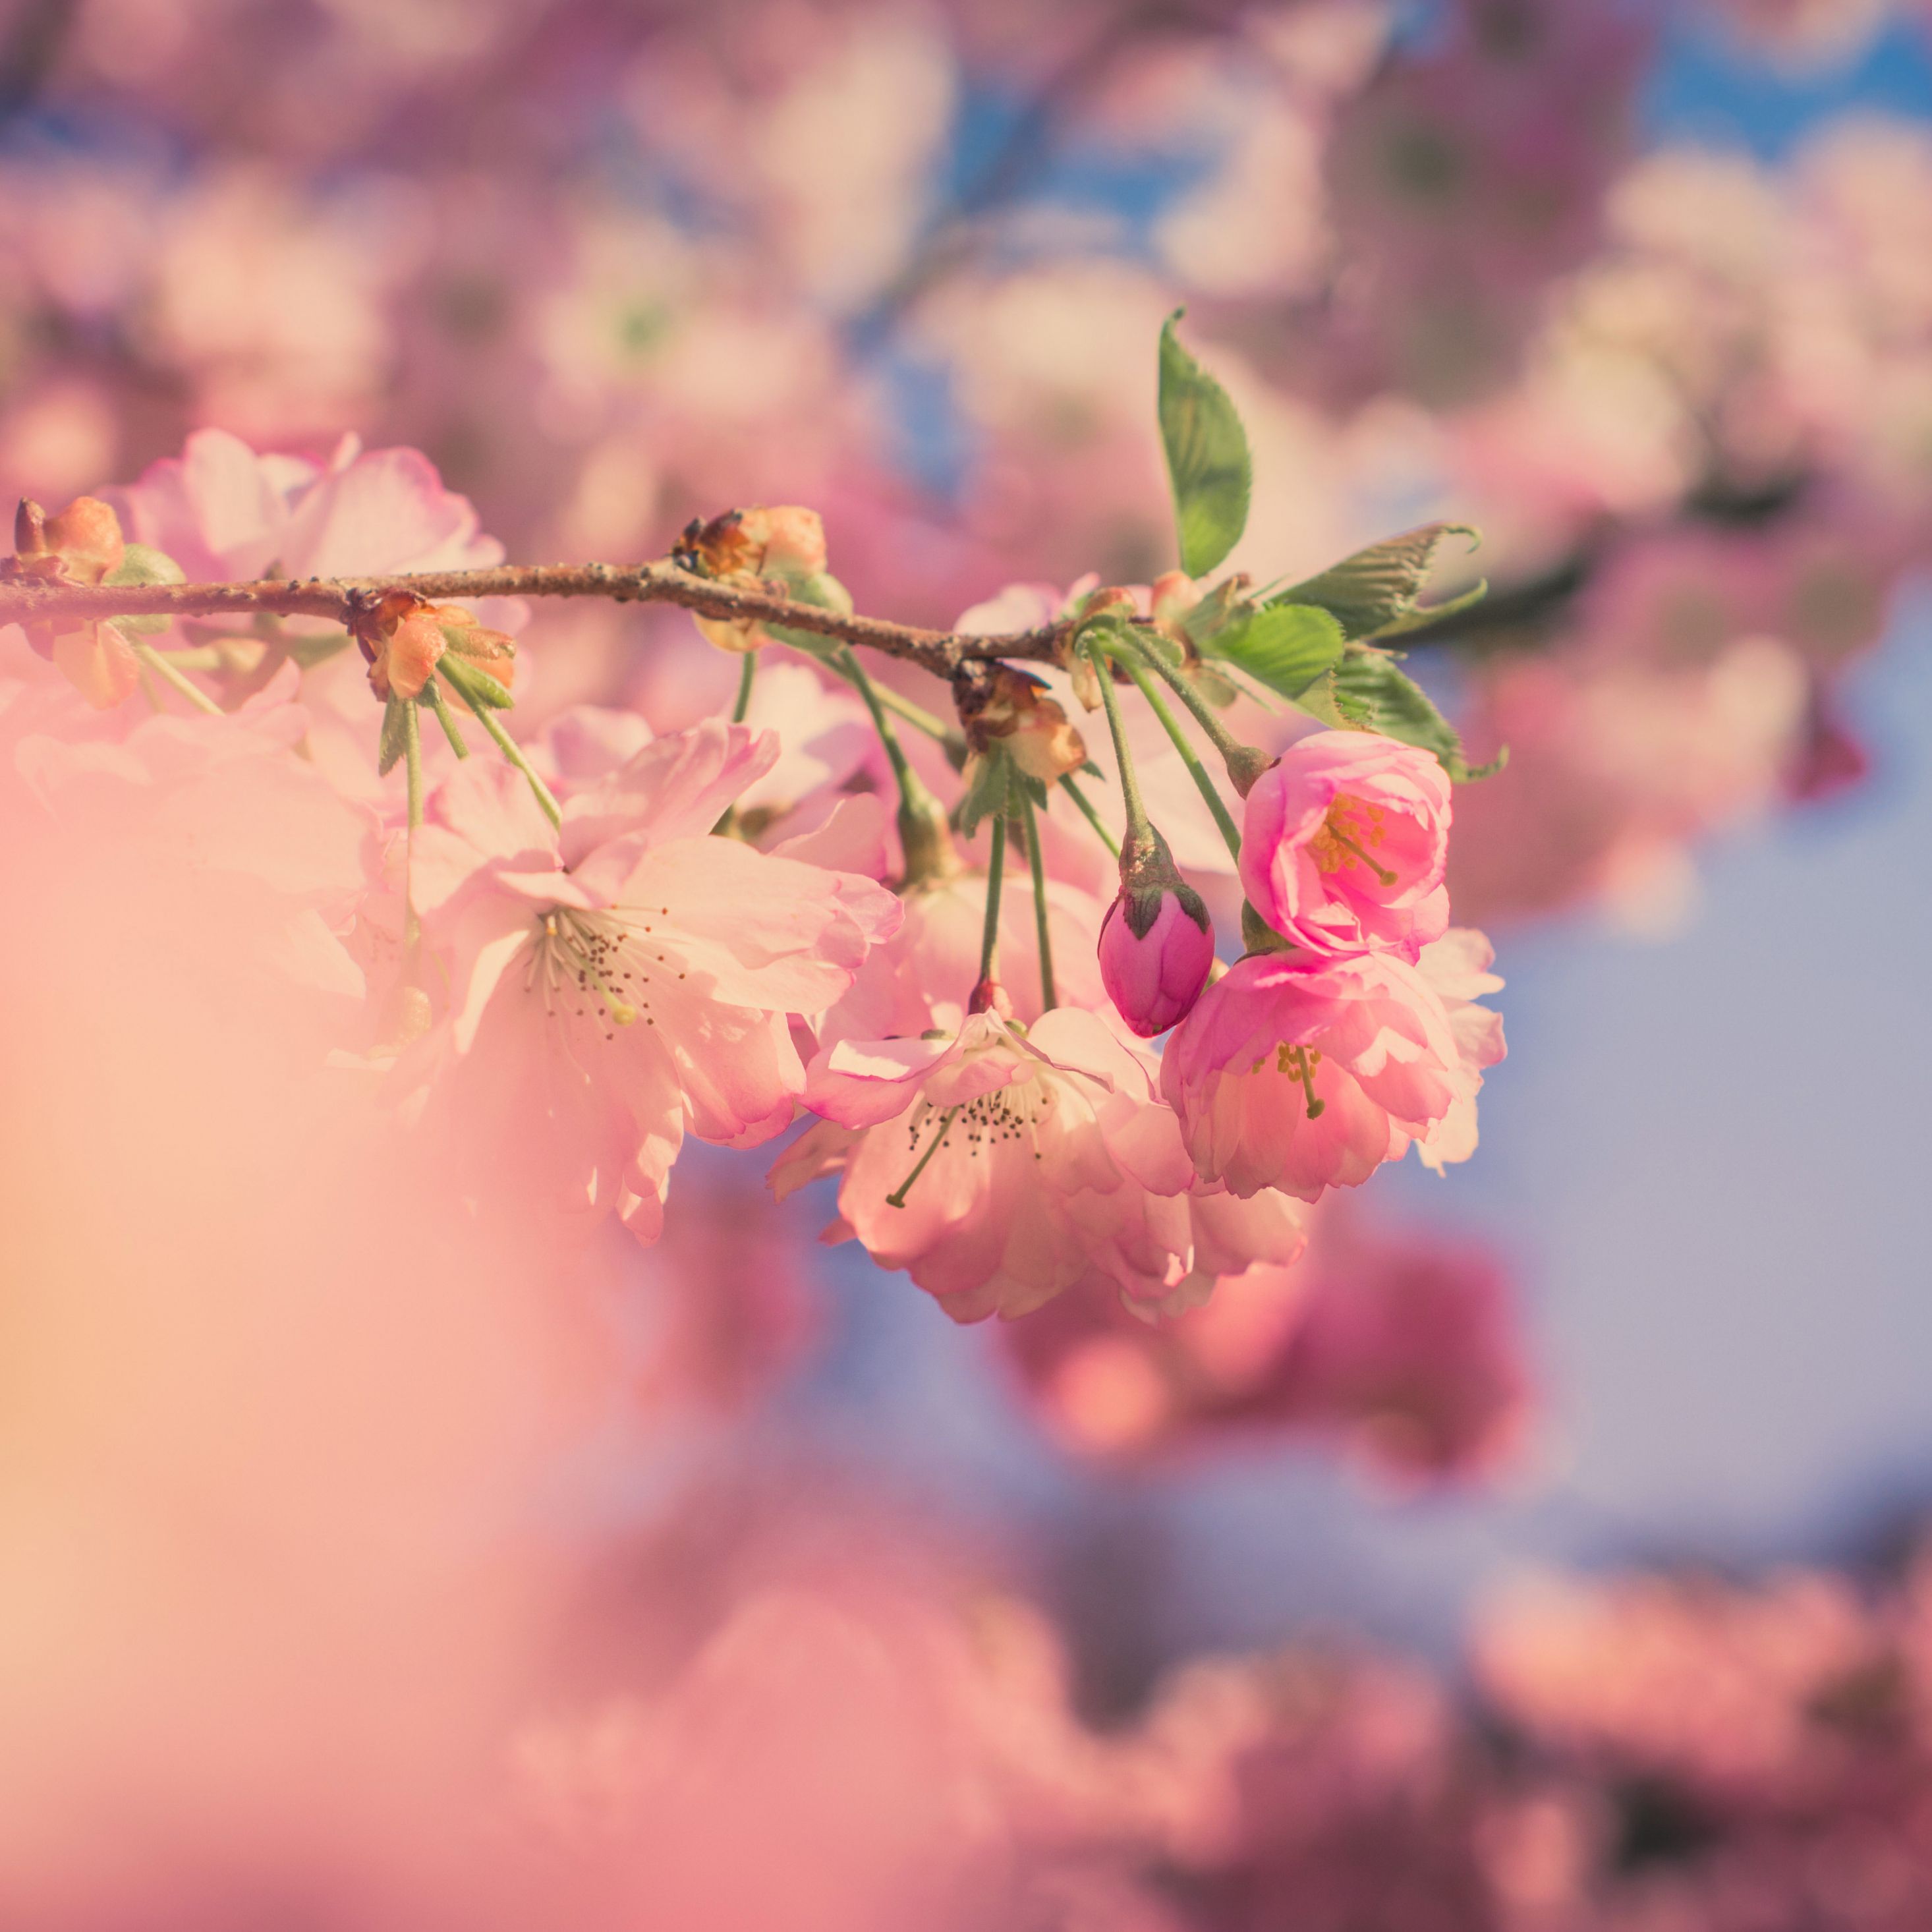 A branch of a tree with pink flowers - Cherry blossom